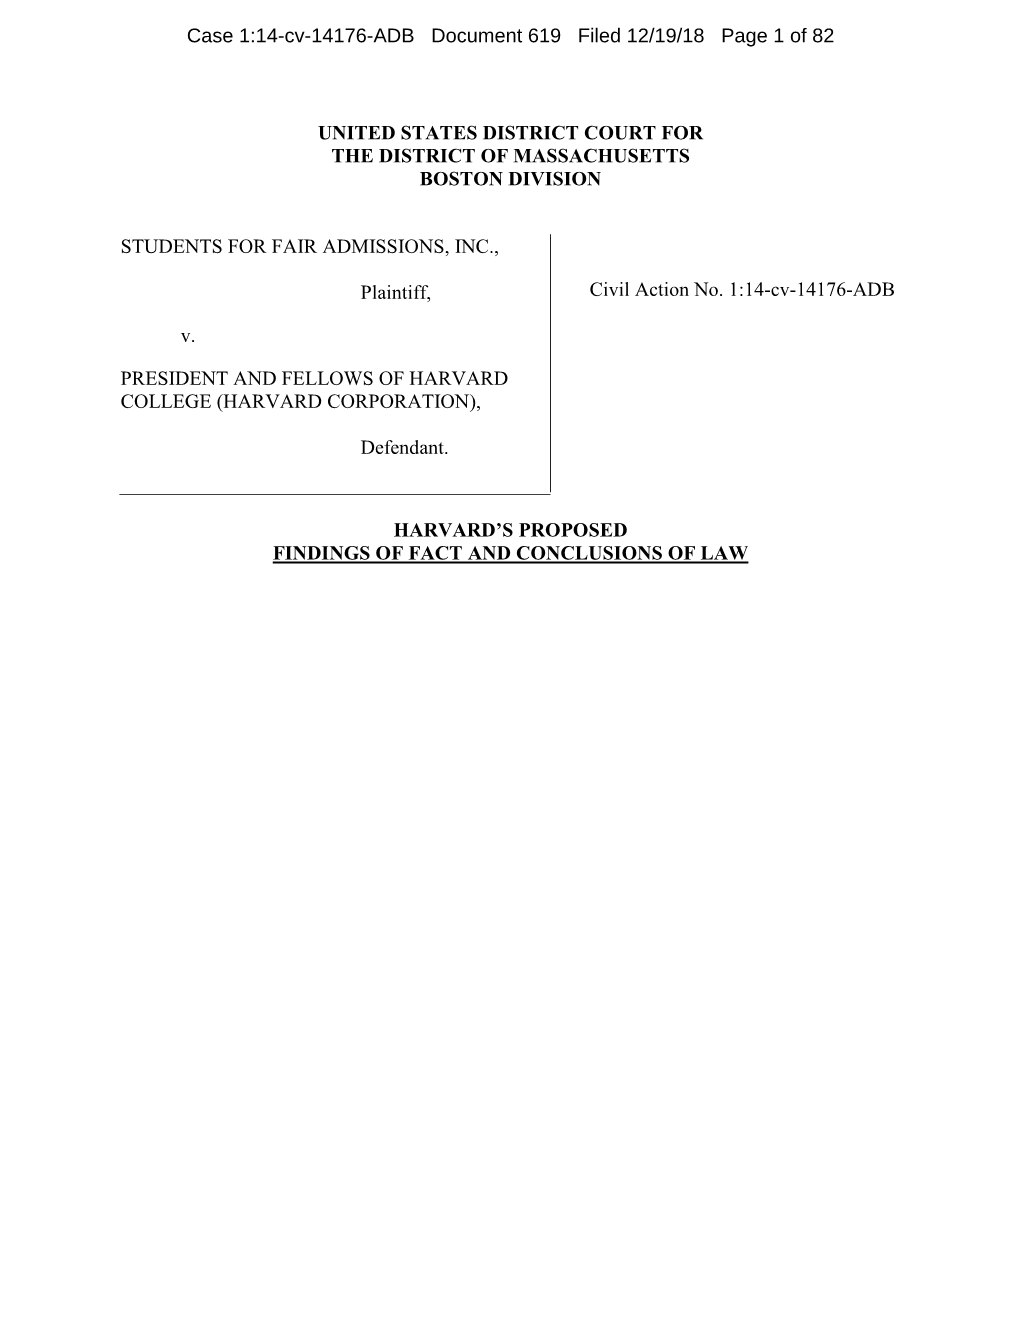 Case 1:14-Cv-14176-ADB Document 619 Filed 12/19/18 Page 1 of 82